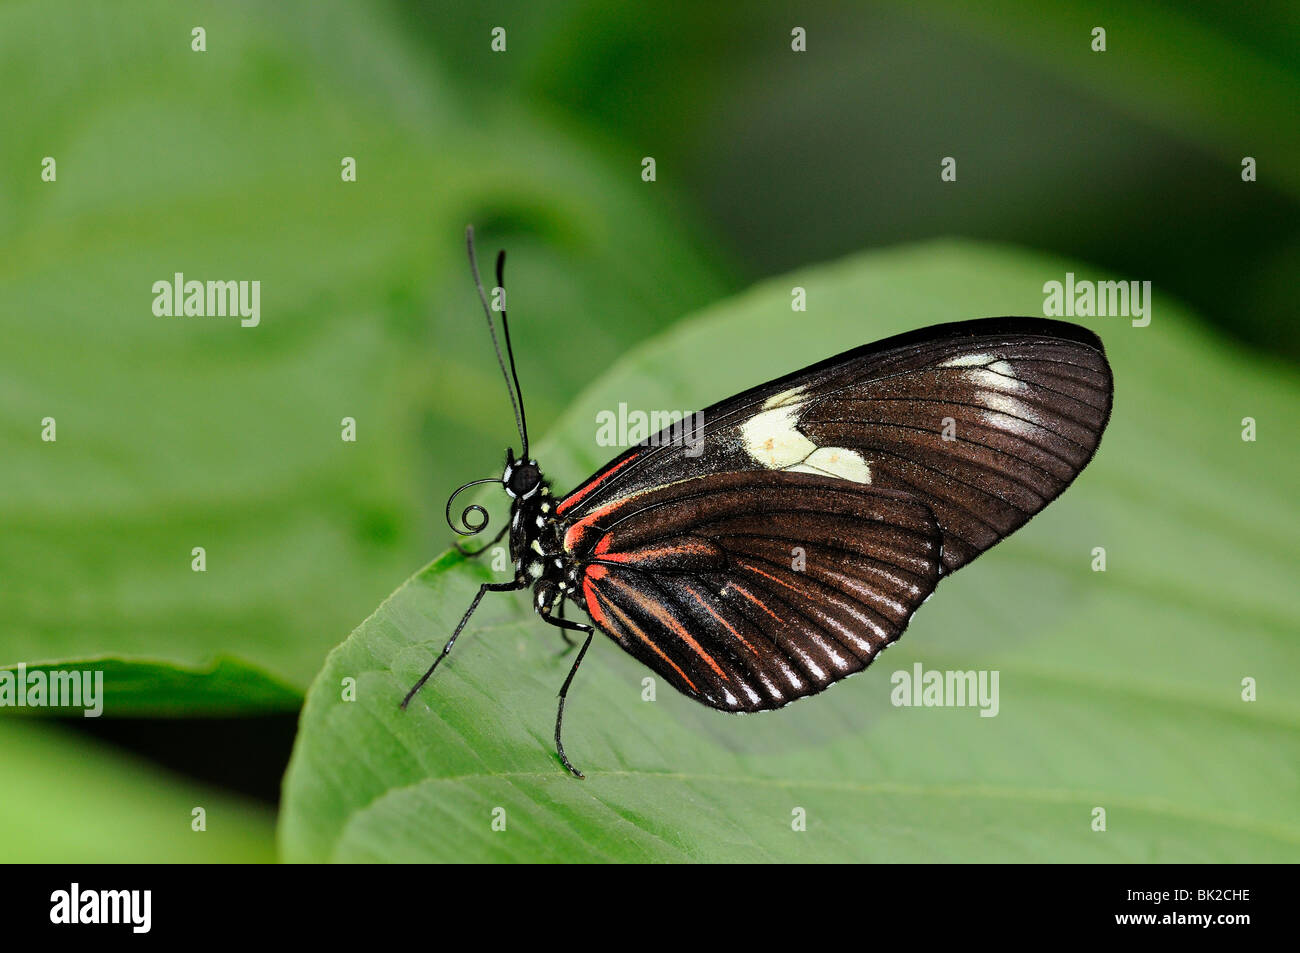 Postman Butterfly (Heliconius melpomene) resting on leaf, native of South America Stock Photo